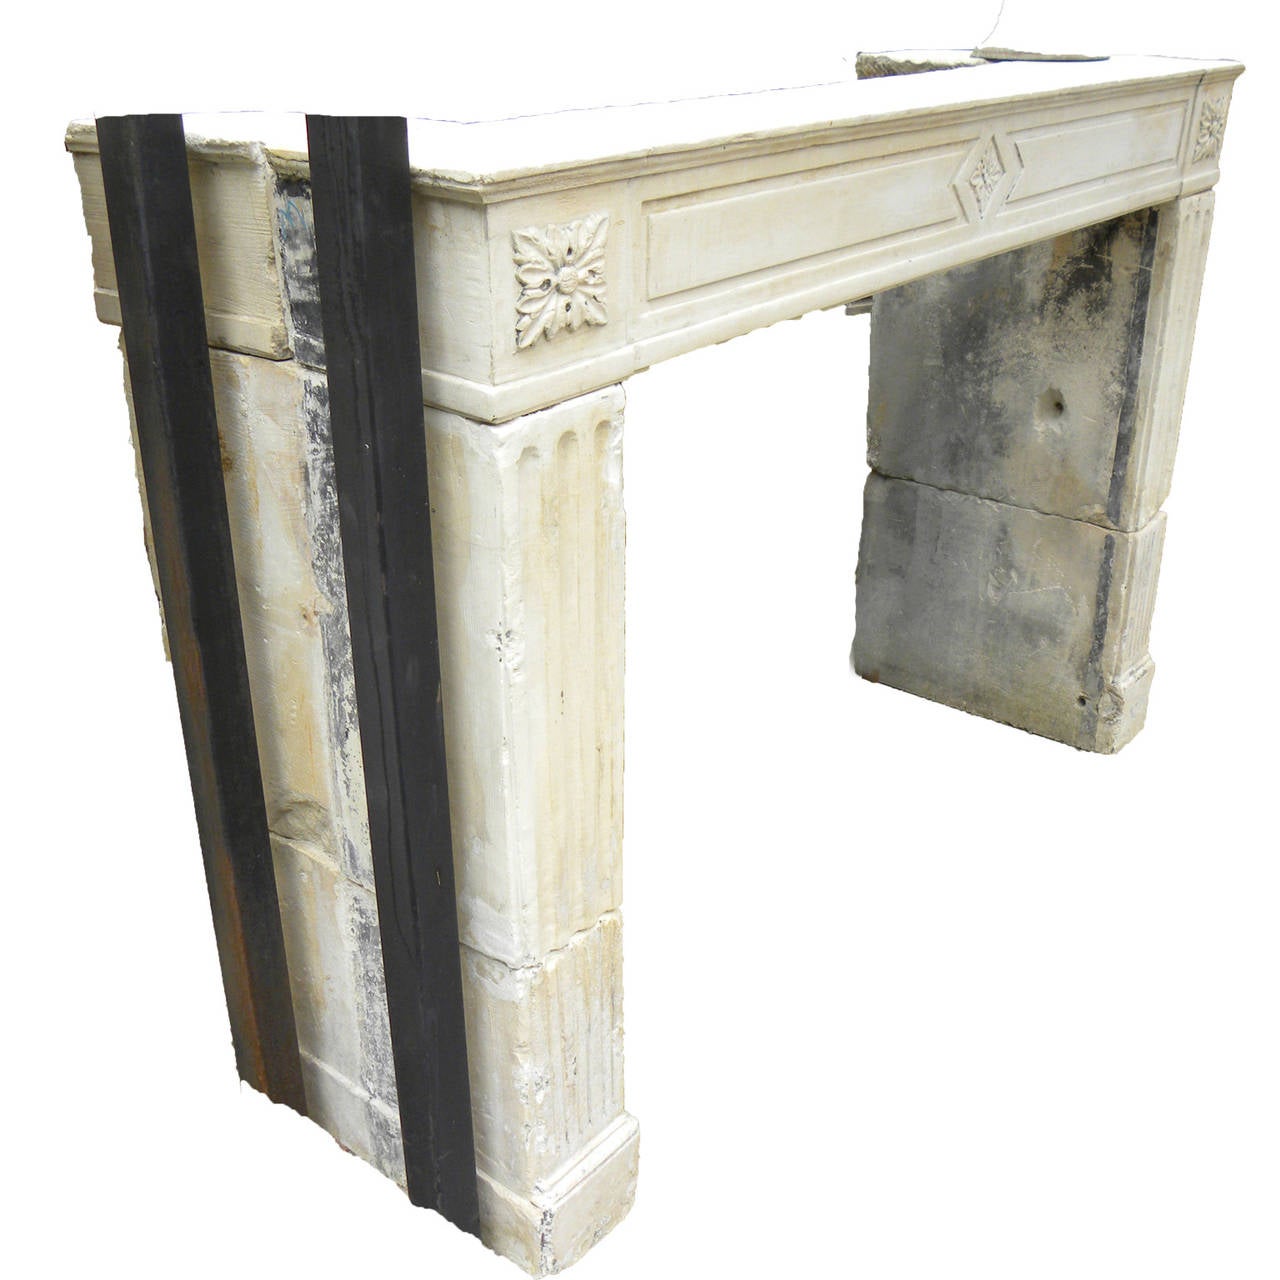 Antique French Limestone fireplace. This Louis XVI style fireplace is handcrafted in limestone. This limestone fireplace is in good condition and from the 18th century. Beautiful Mantel with carved accents along the face of the Mantel as well as the